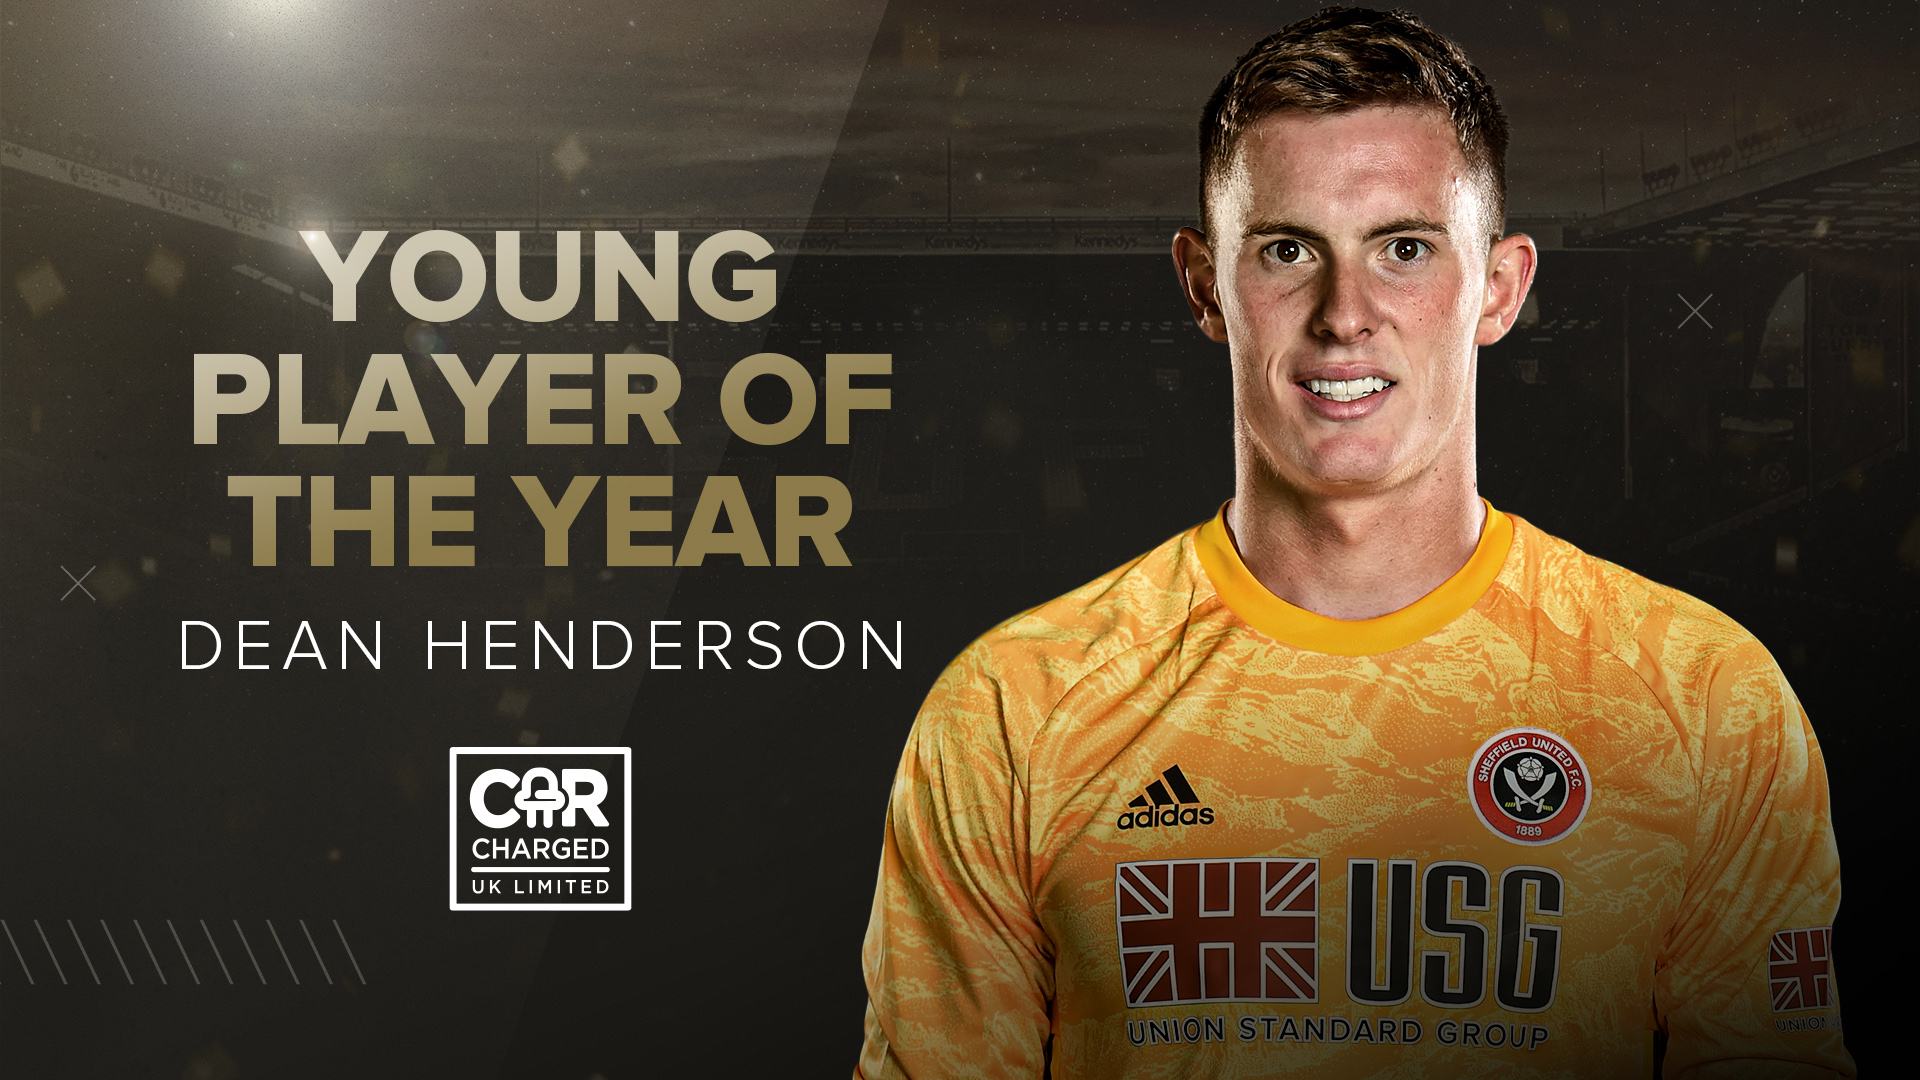 Dean Henderson is the Sheffield United FC Young Player of the Year Award winner